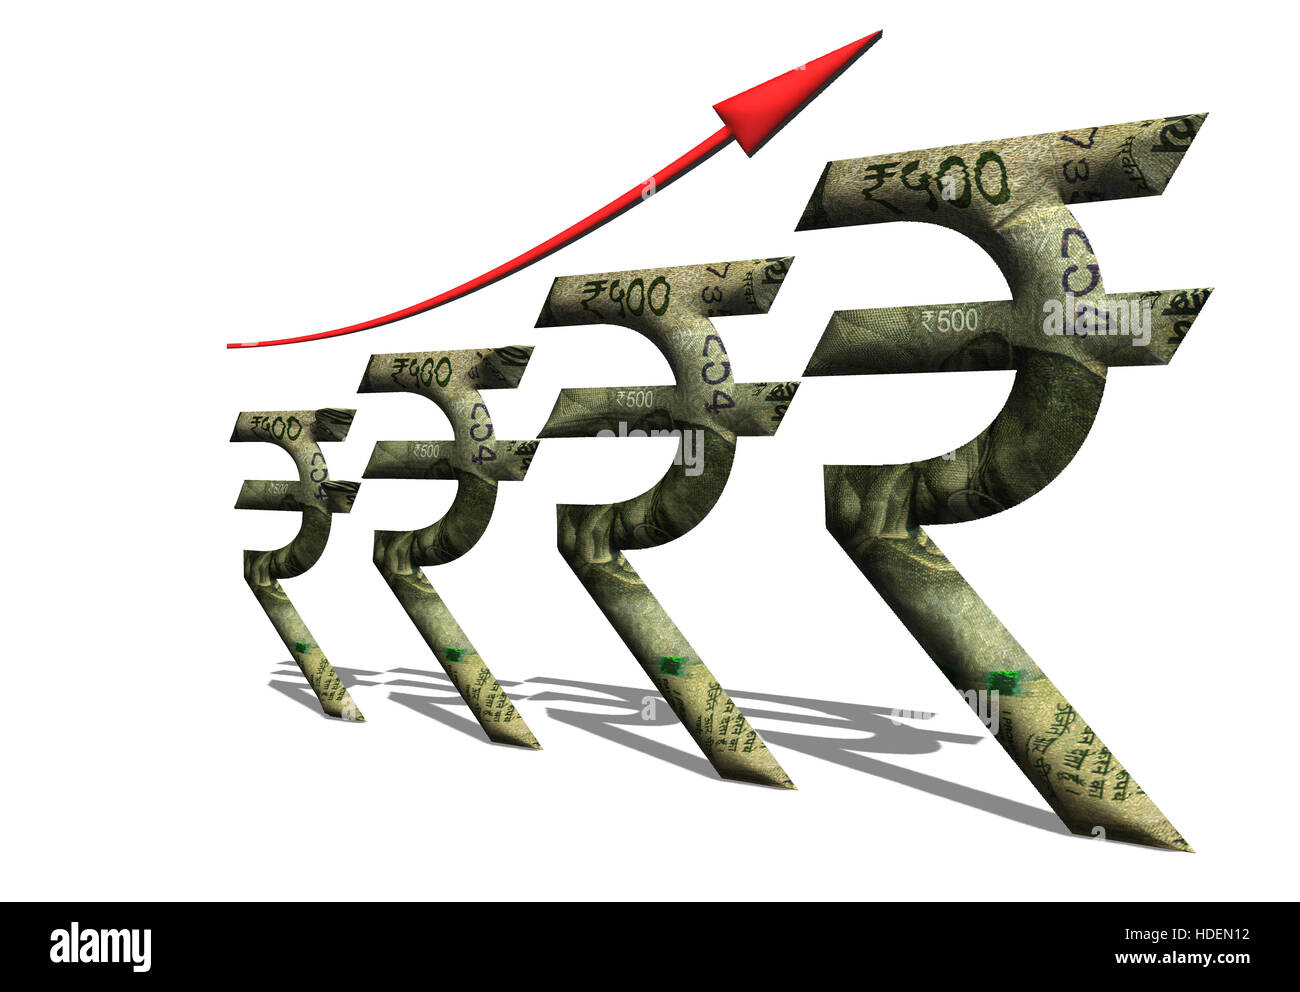 An illustration showing economic growth through rupee symbol with 500 rupee note inset in the rupee symbol. Stock Photo